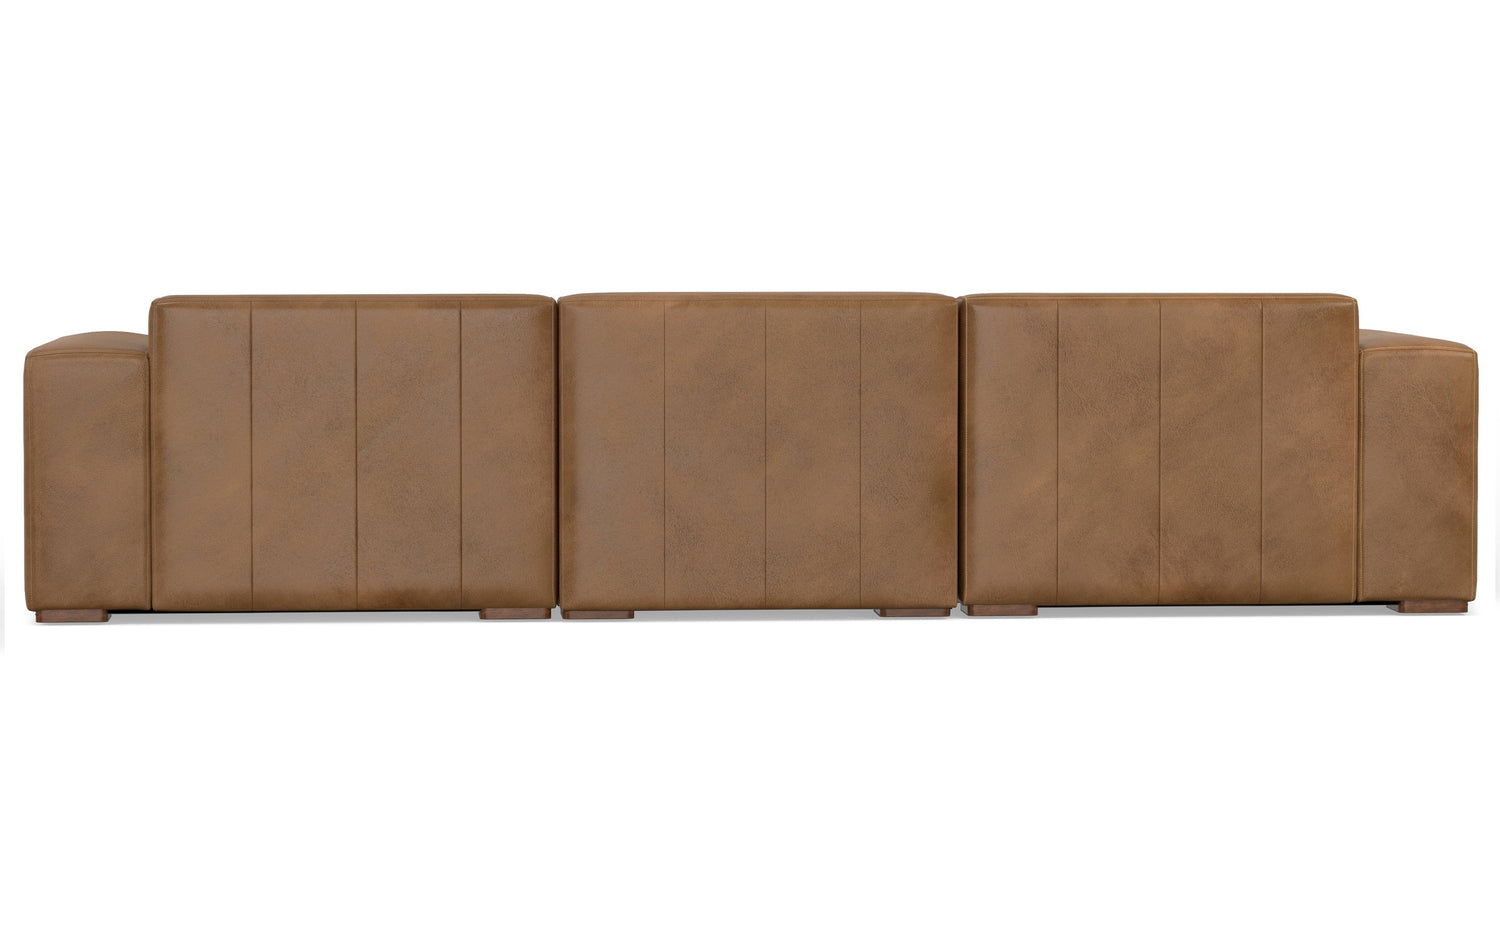 Caramel Brown Genuine Leather | Rex 2 Seater Sofa and Left Chaise in Genuine Leather